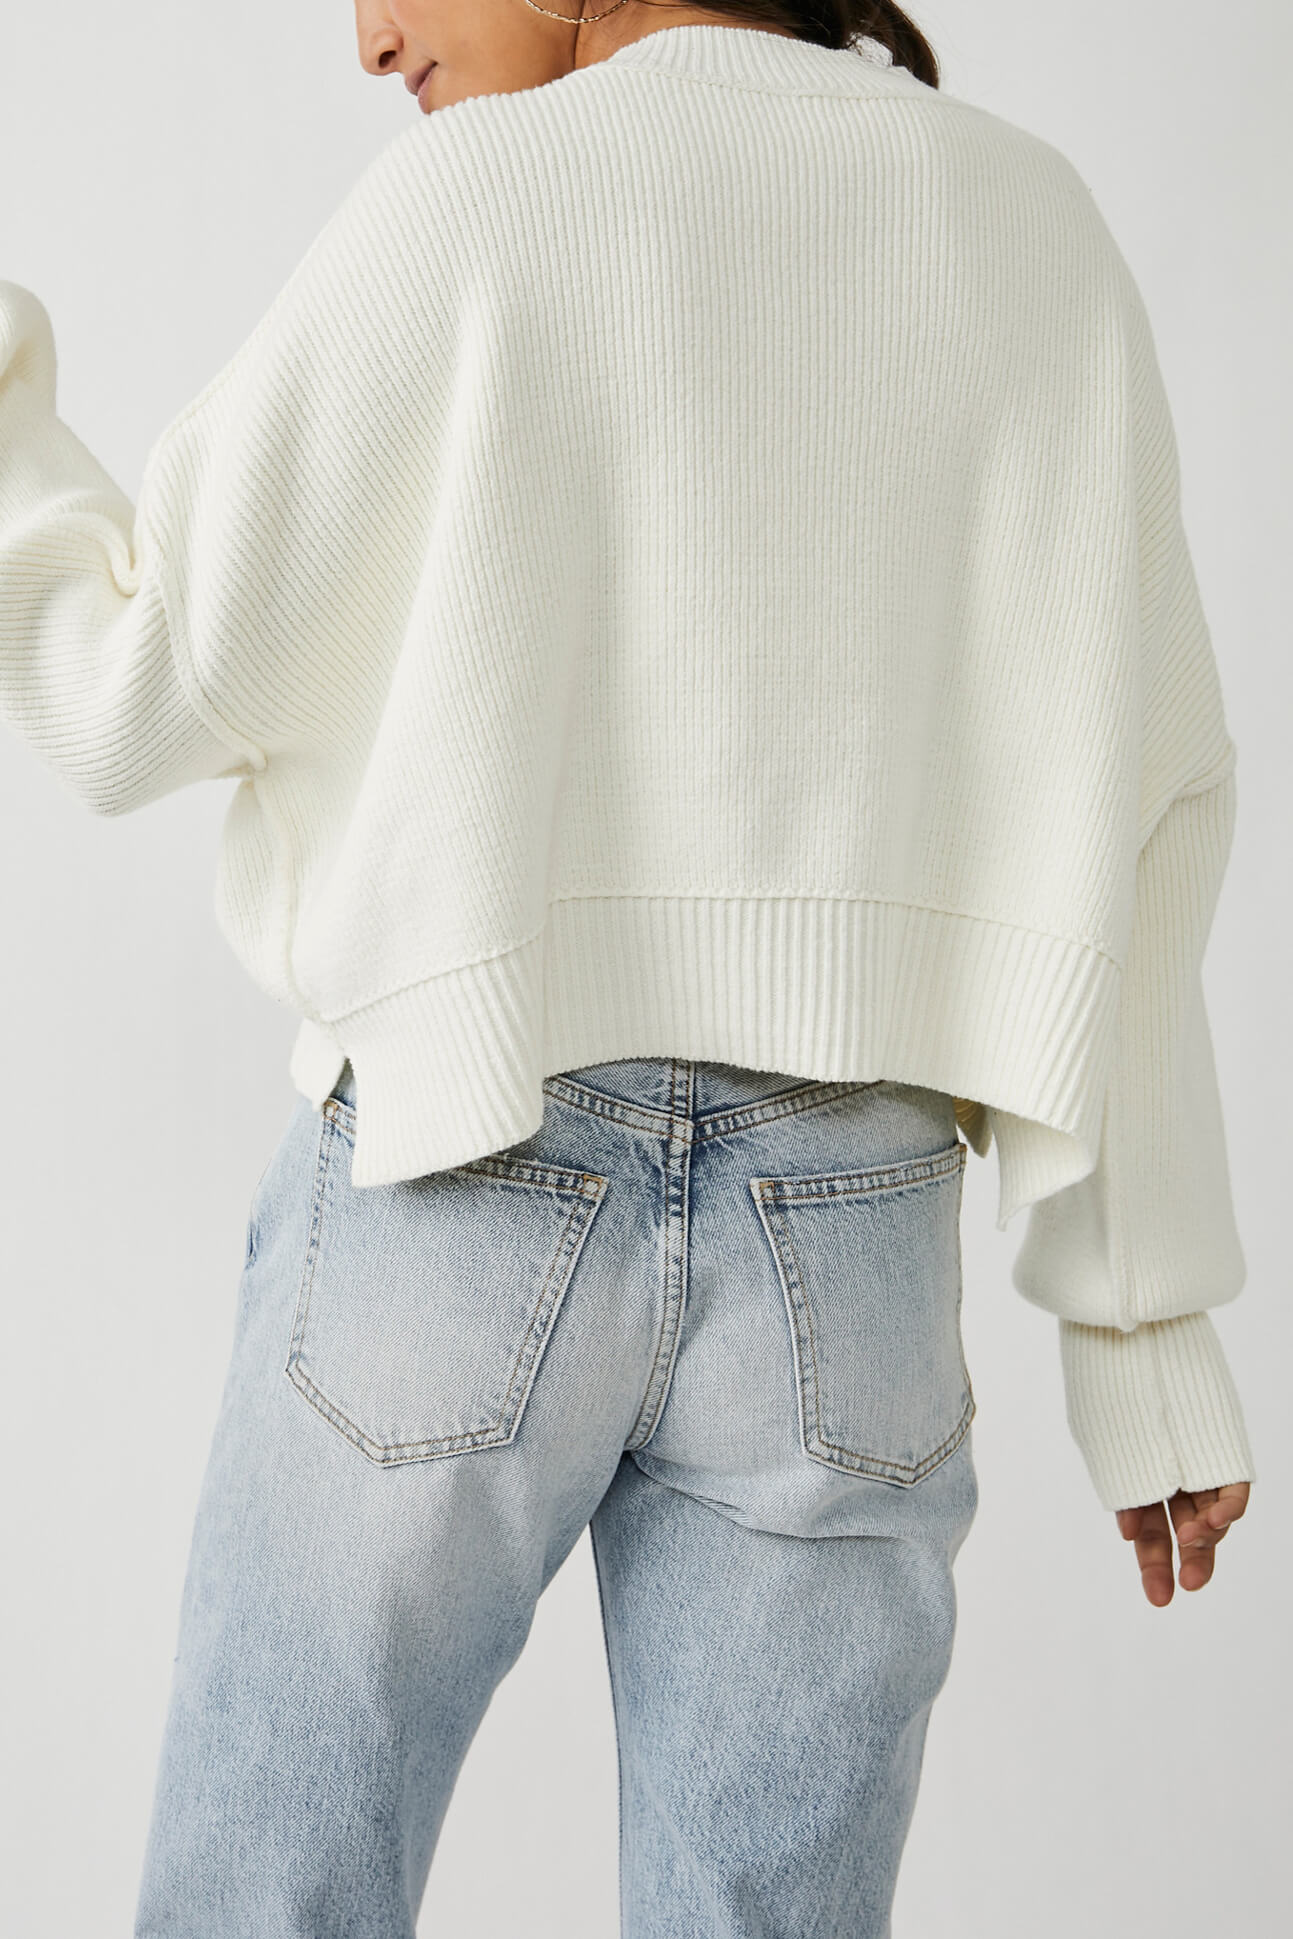 white pullover free people sweater